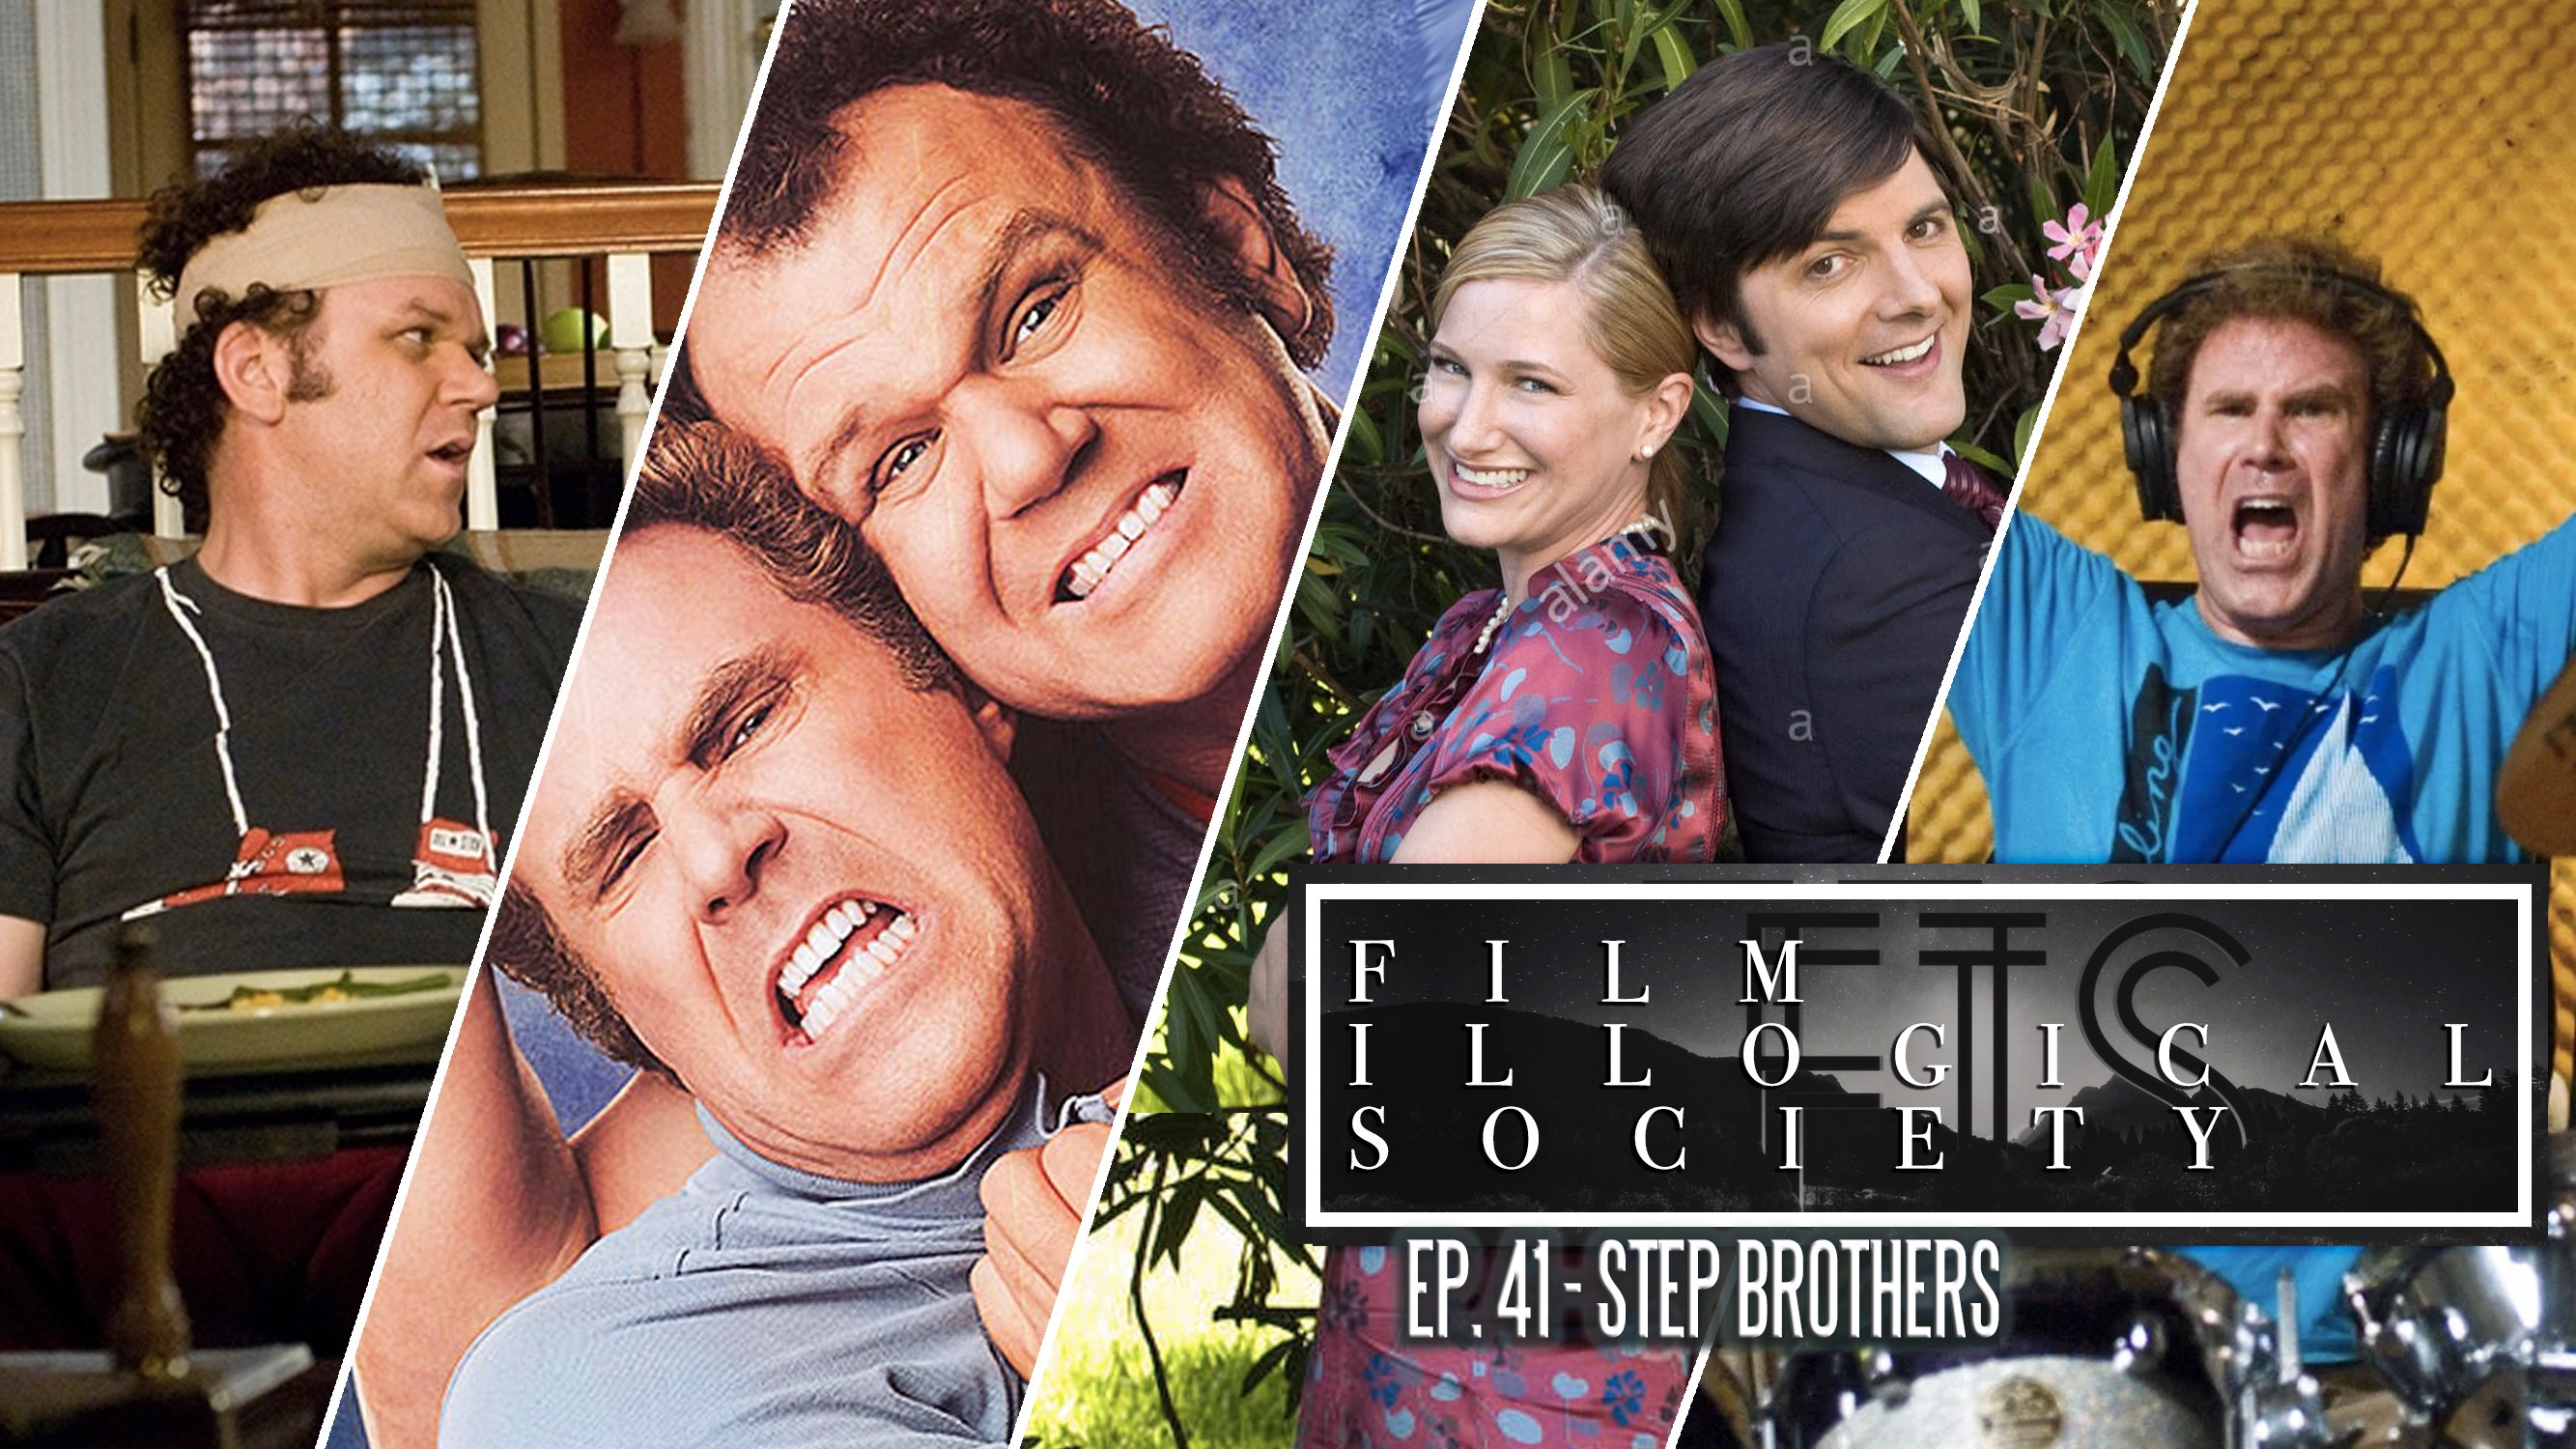 41 – Step Brothers